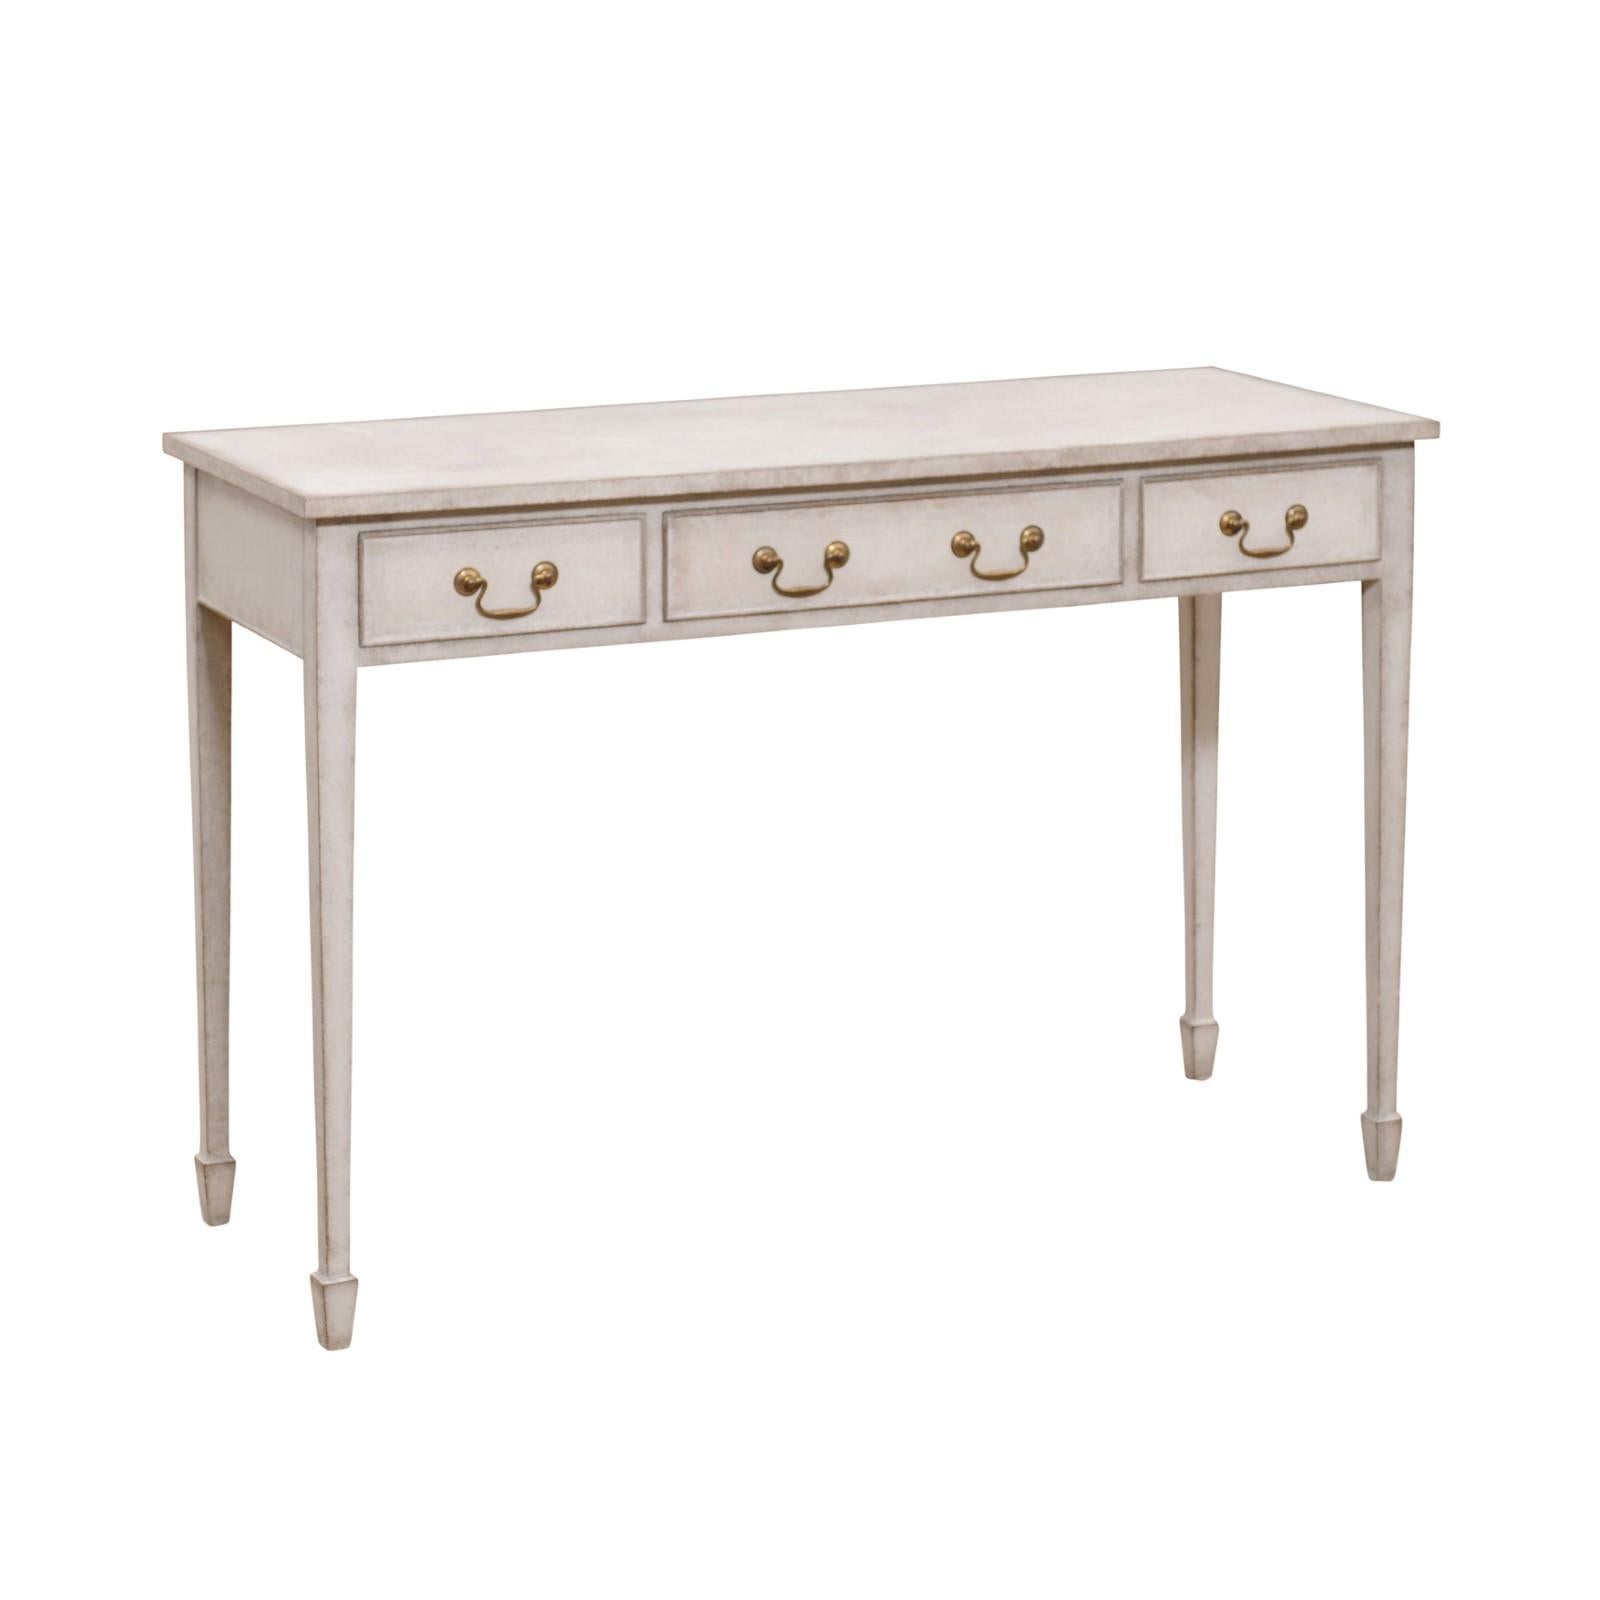 A Swedish painted wood console table from the late 19th century, with three drawers, brass hardware, tapered legs and spade feet. Created in Sweden during the last decade of the 19th century, this elegant painted console table features a simple